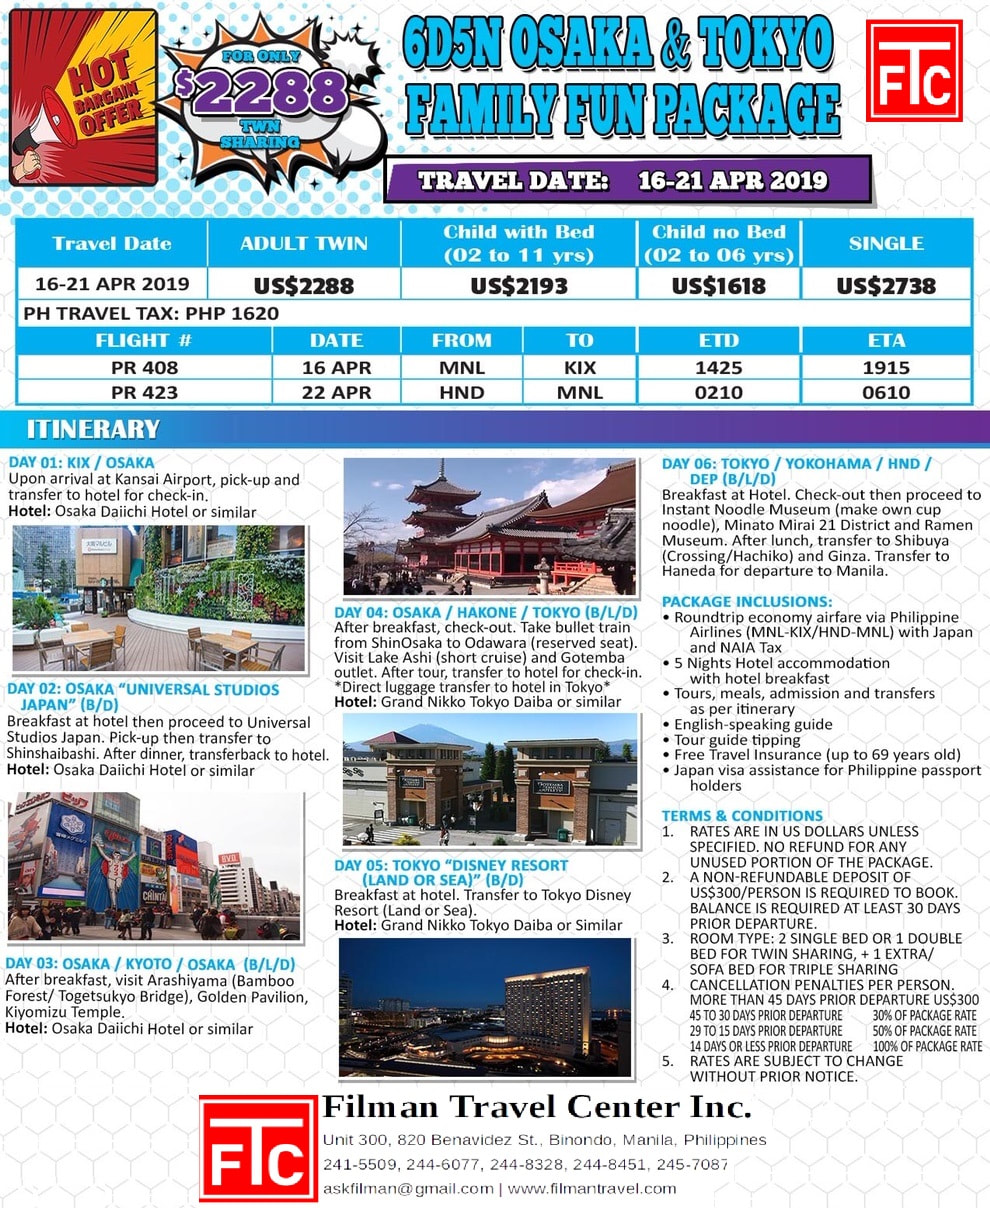 Flyer with details for 6 Days 5 nights osaka tokyo family fun package for holy week $2288 twin sharing, april 16-21 from manila 2019